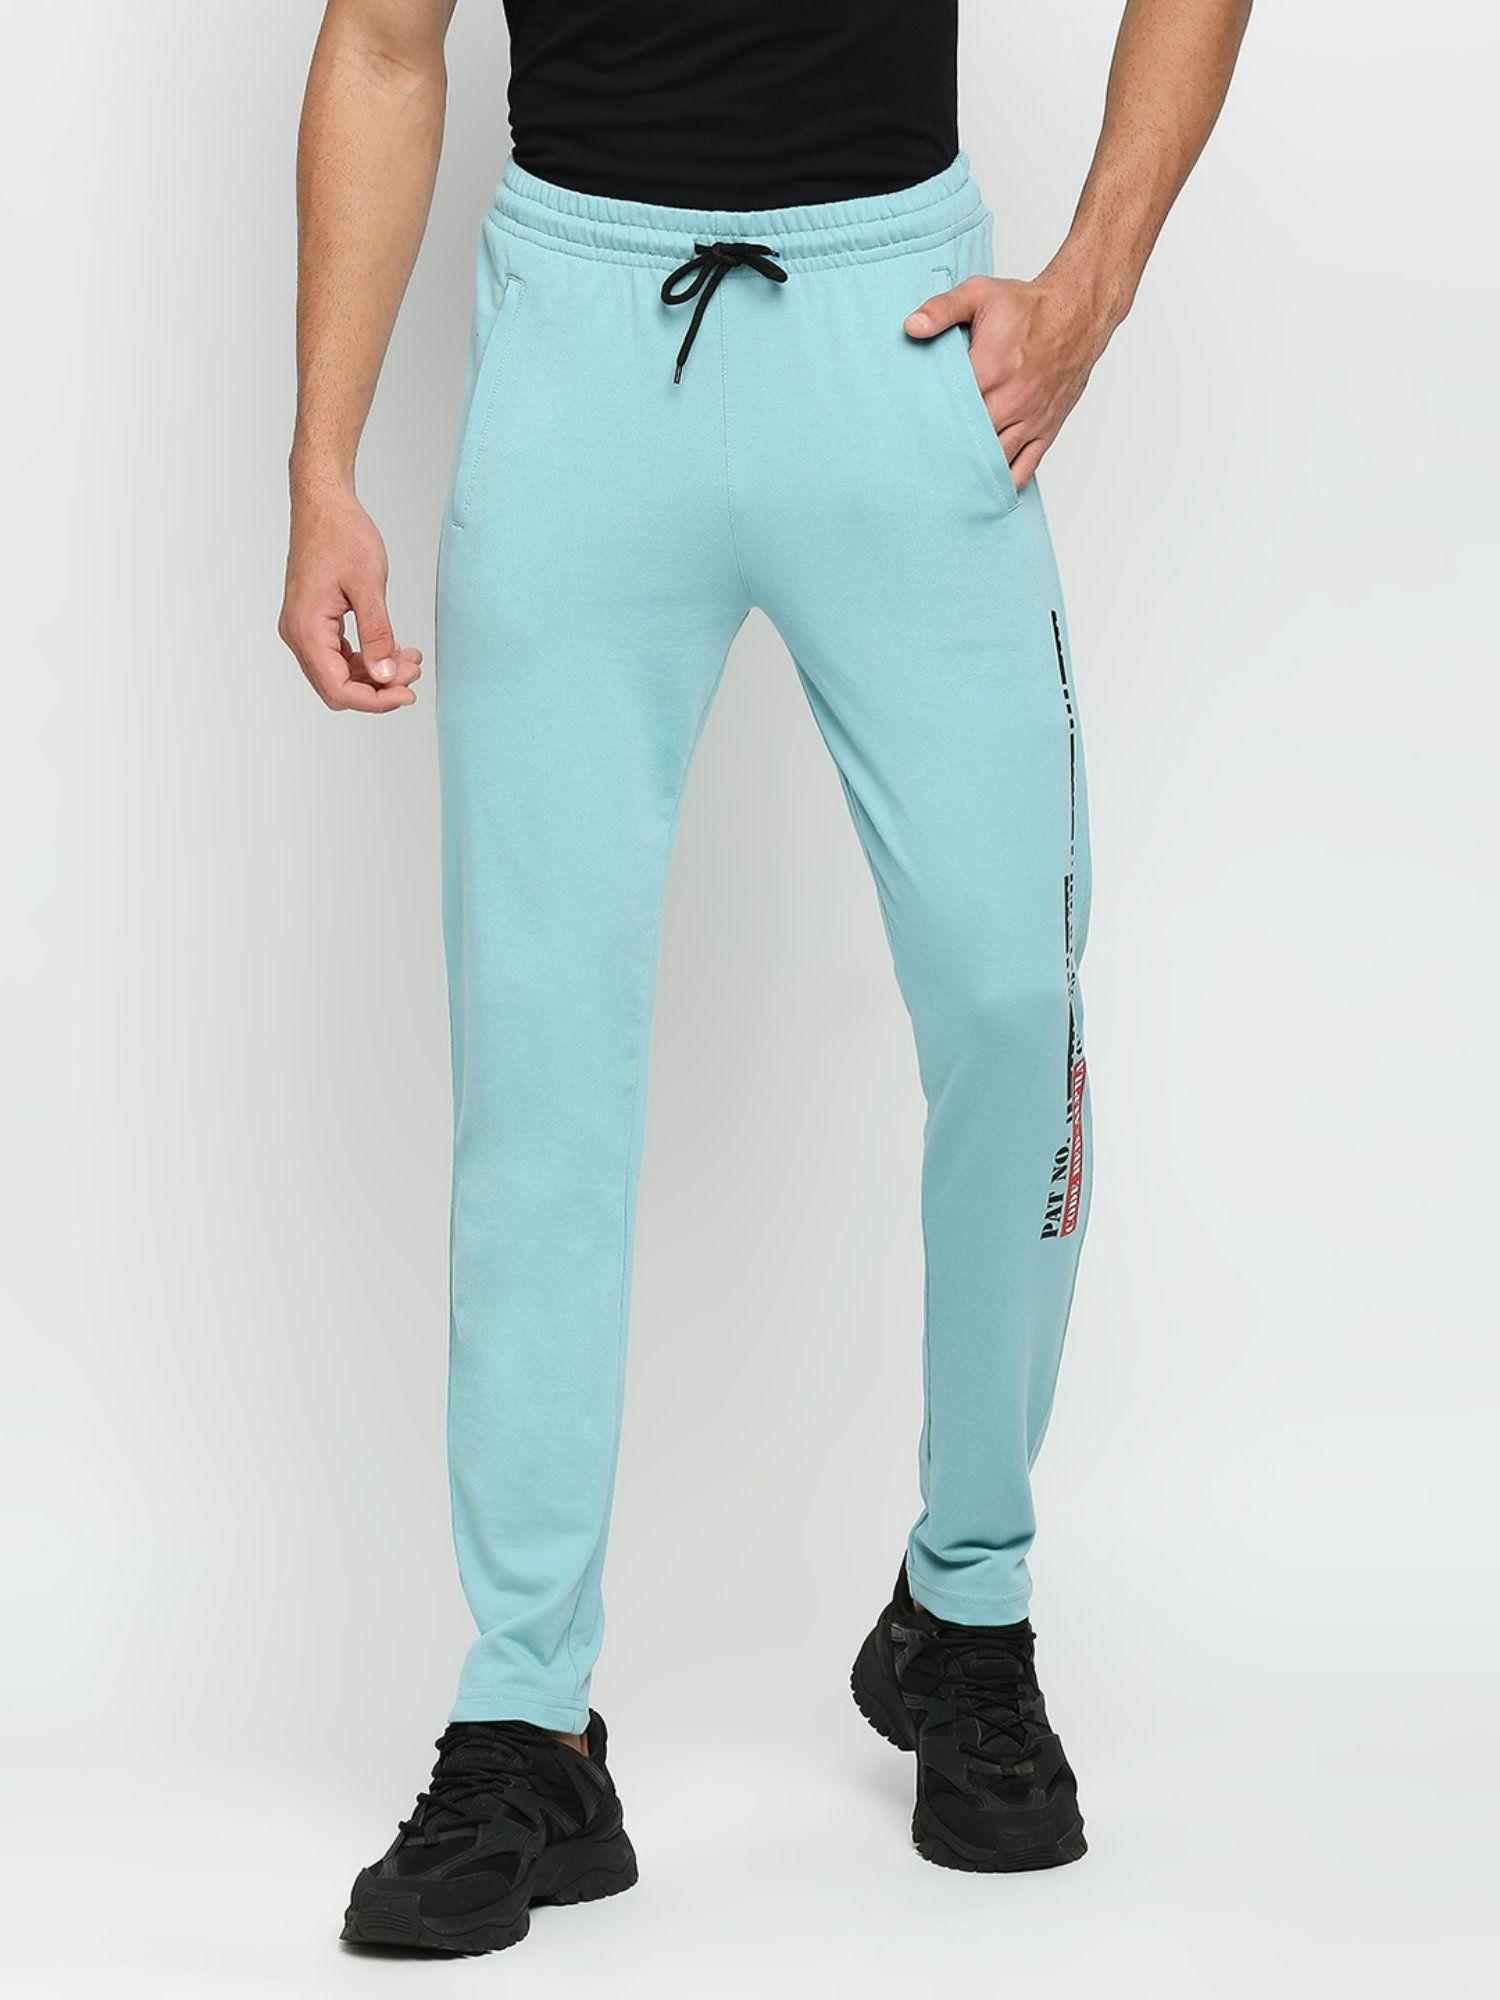 cotton polyester slim fit french terry knit joggers for mens - blue